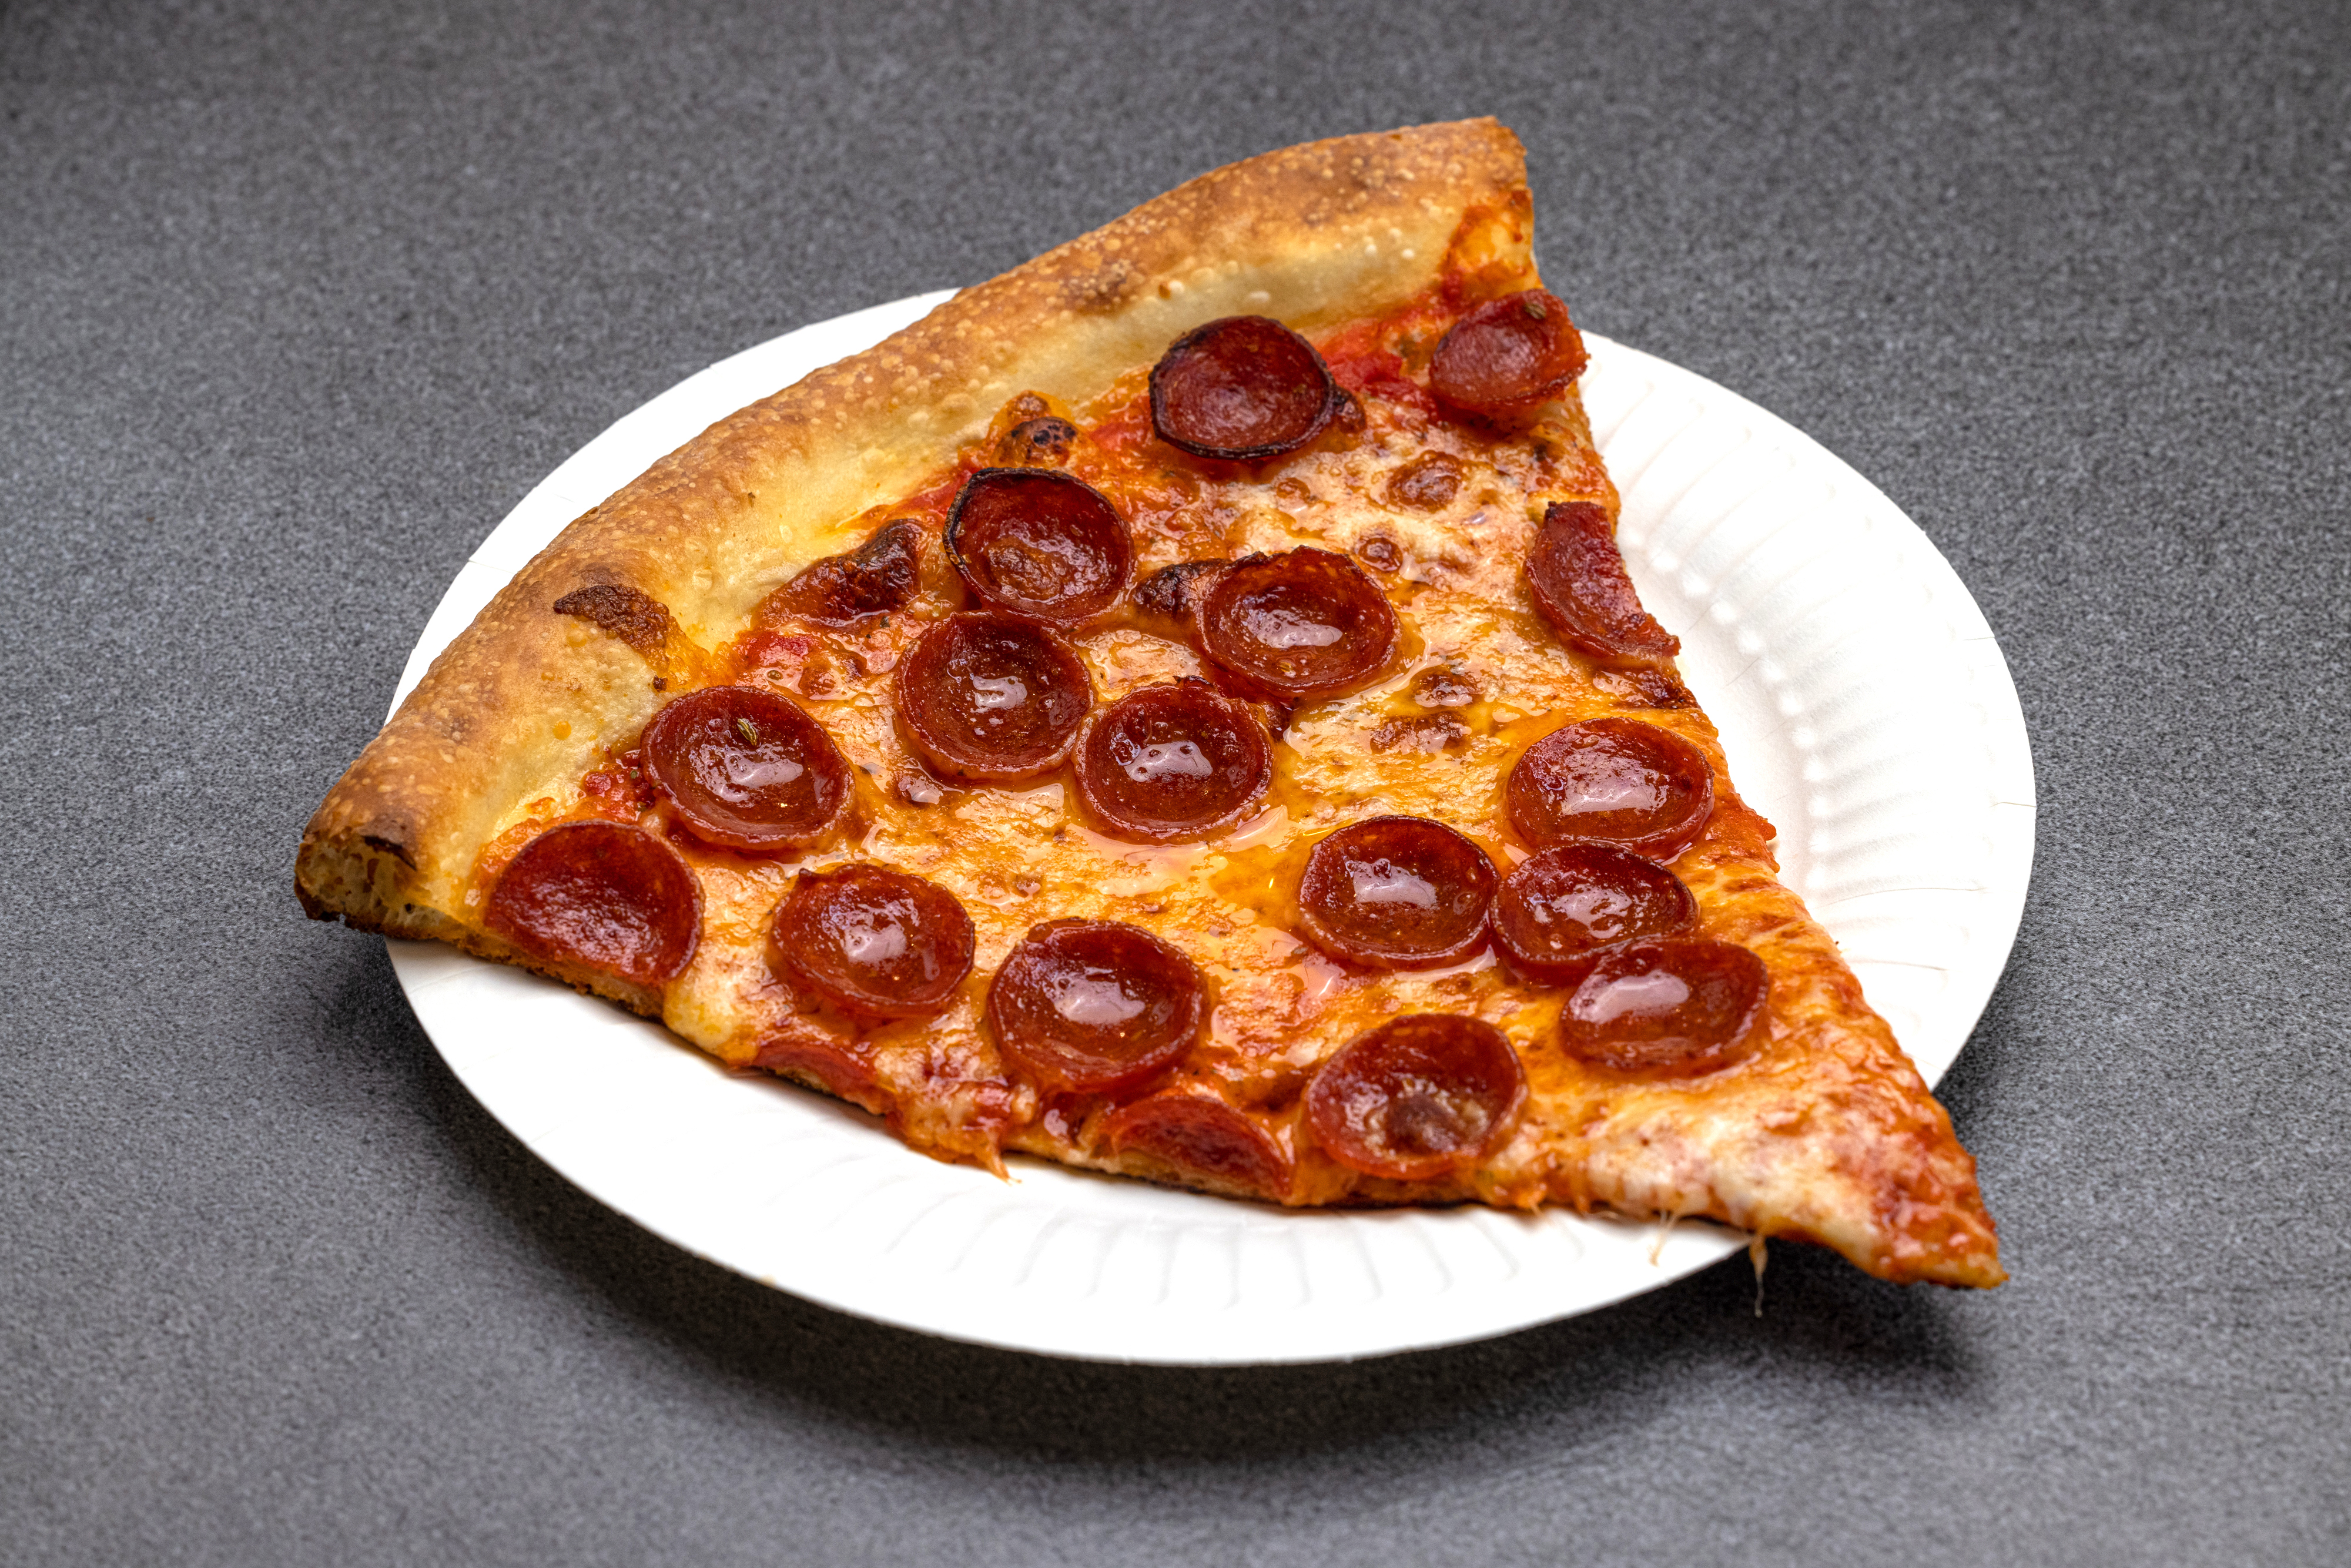 A slice of pepperoni cheese on a paper plate.